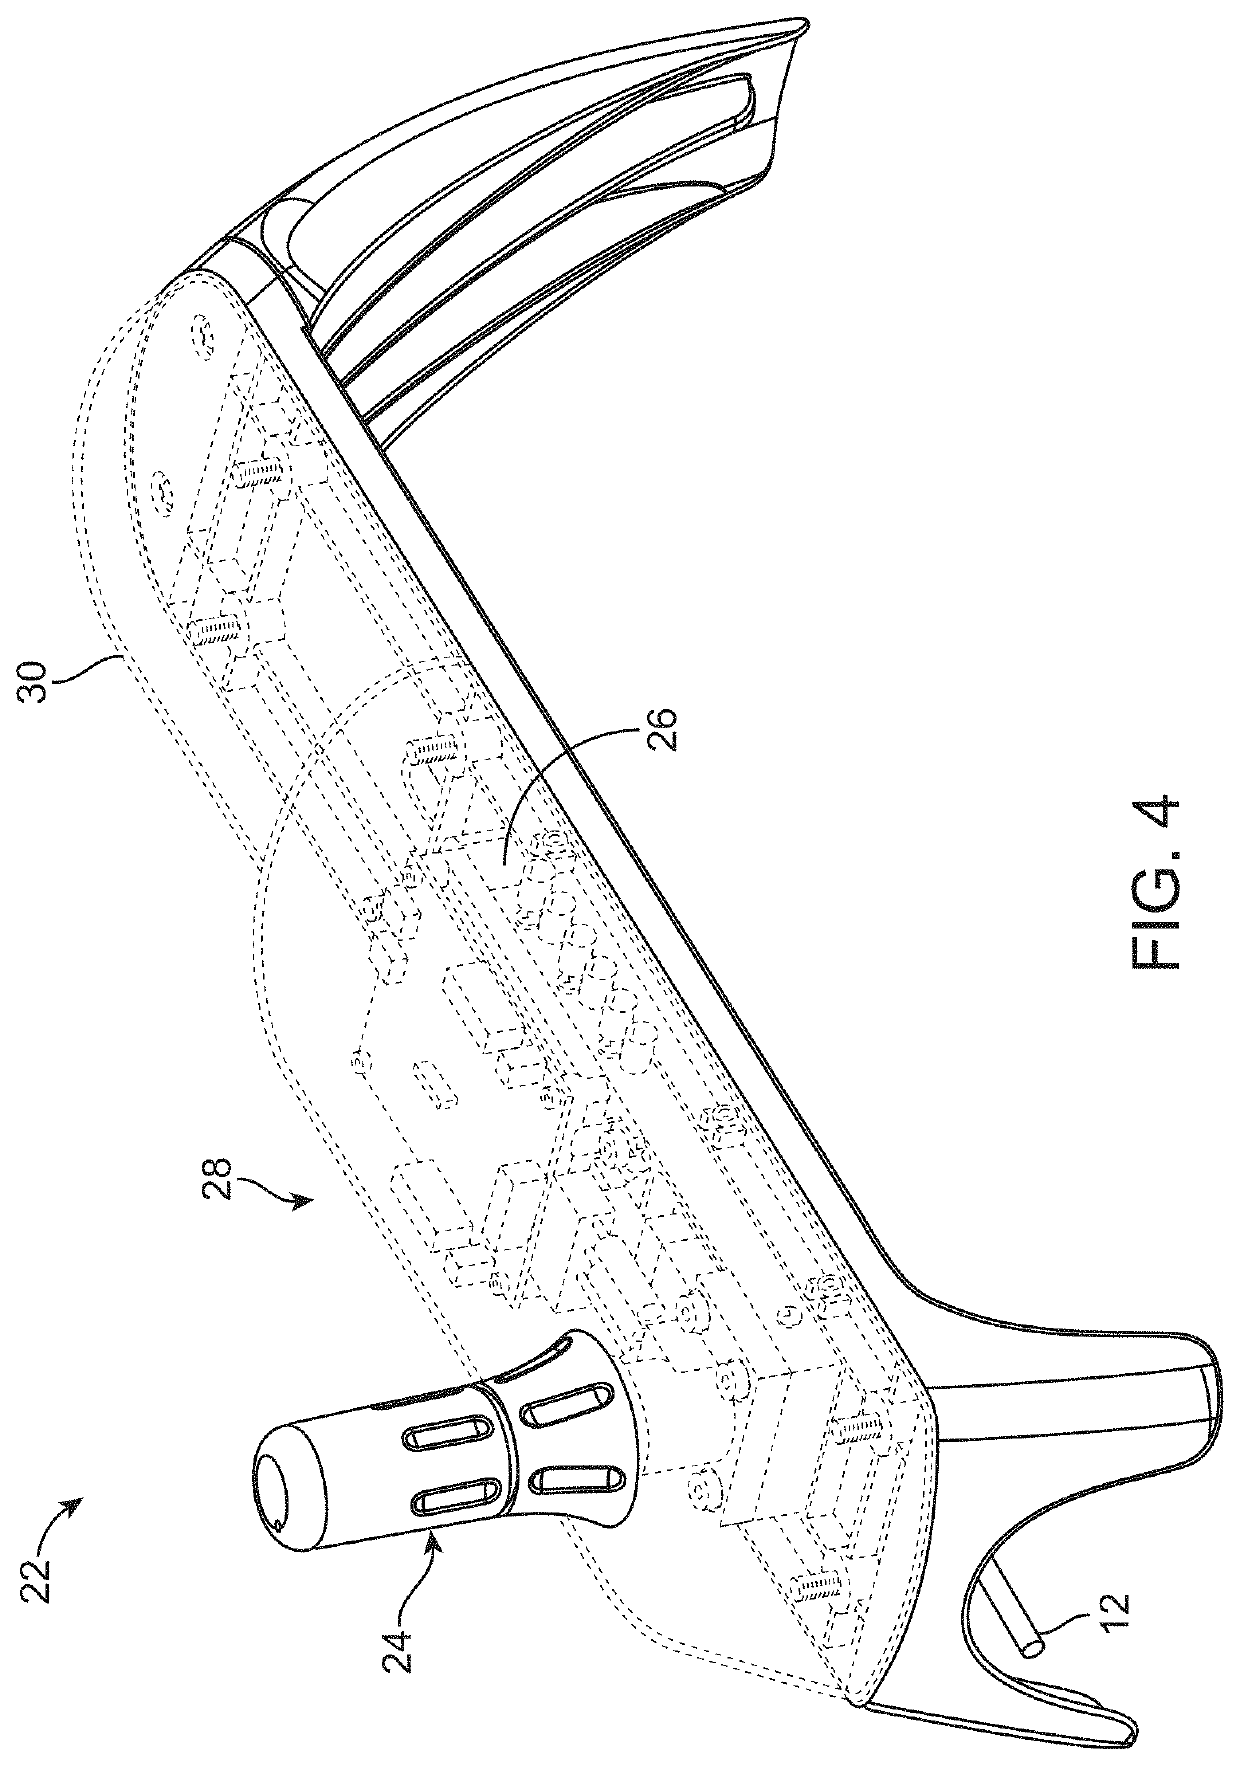 Matrix supported balloon articulation systems, devices, and methods for catheters and other uses